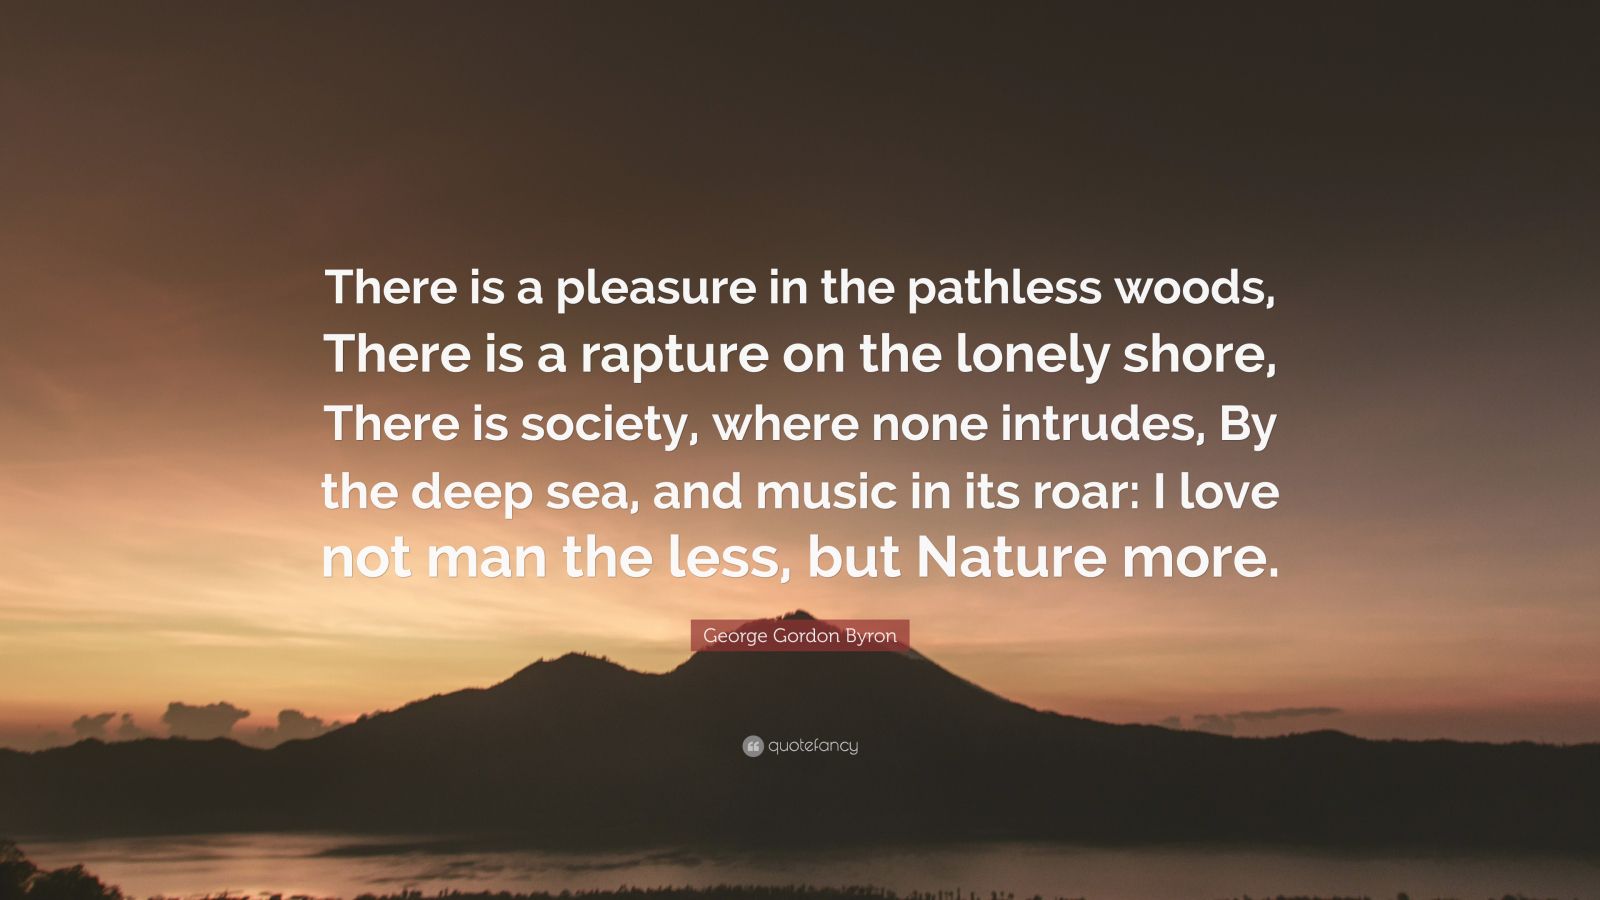 theres a pleasure in the pathless woods